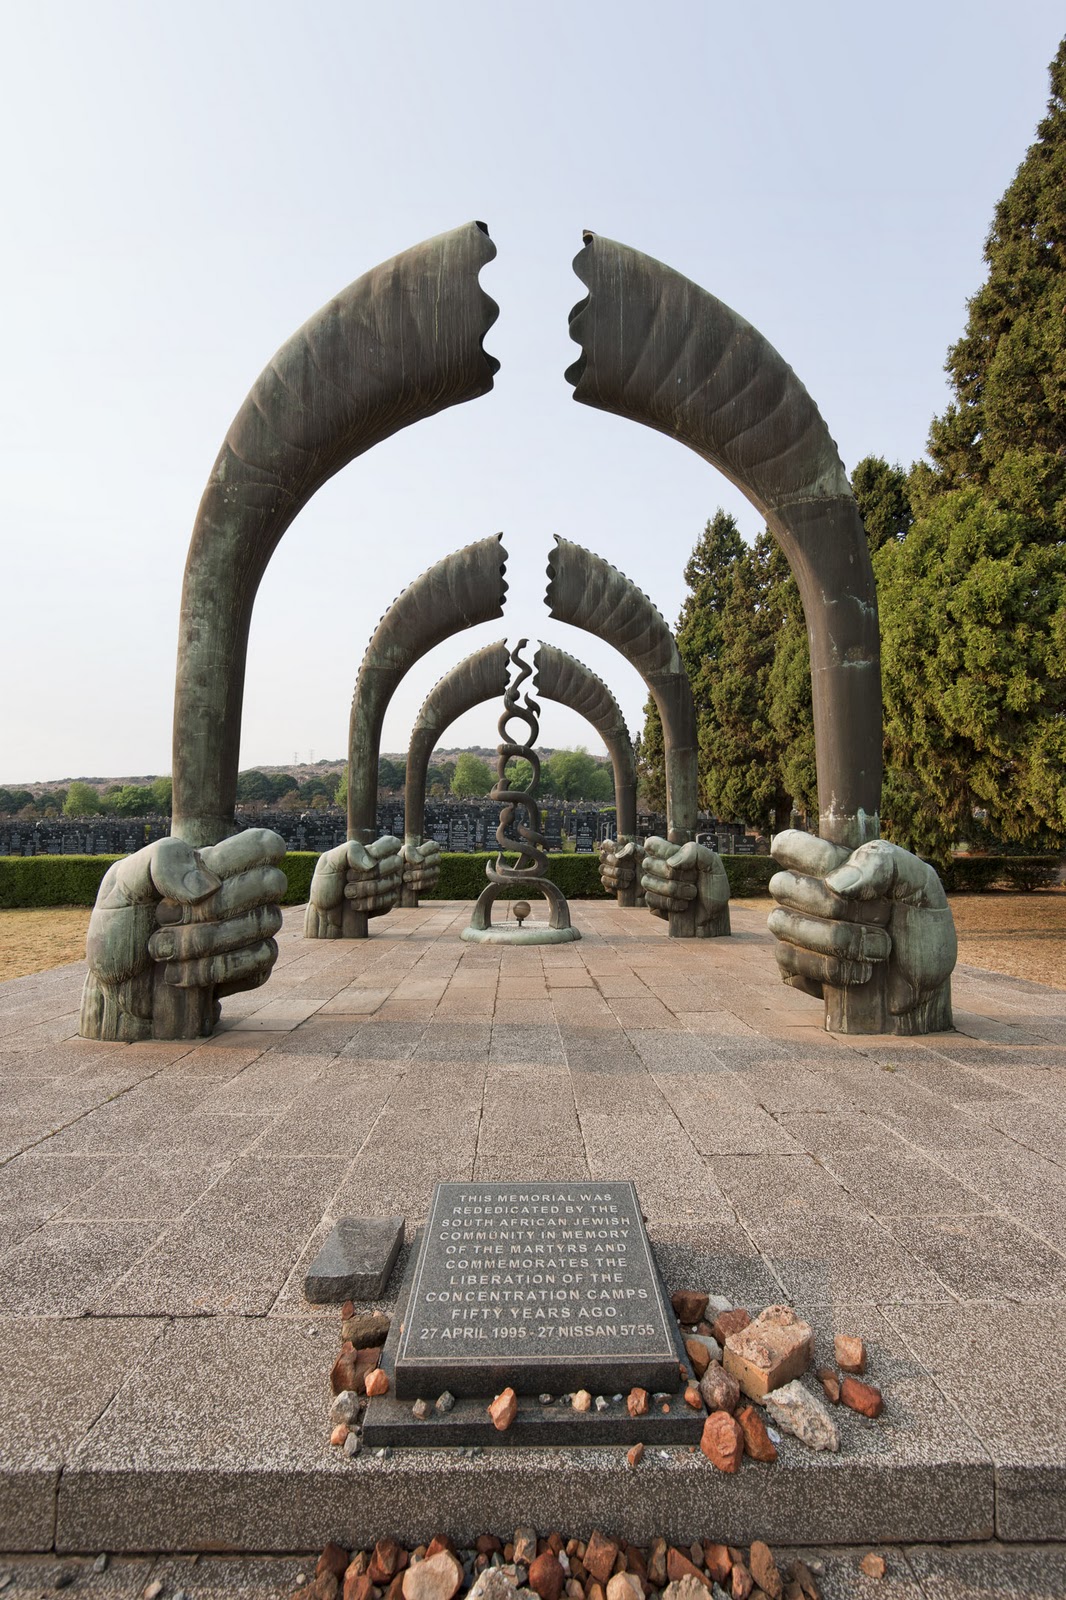 Memorial to the Six Million, Monument to the Six Million, Holocaust Memorial, Westpark Cemetery, Johannesburg